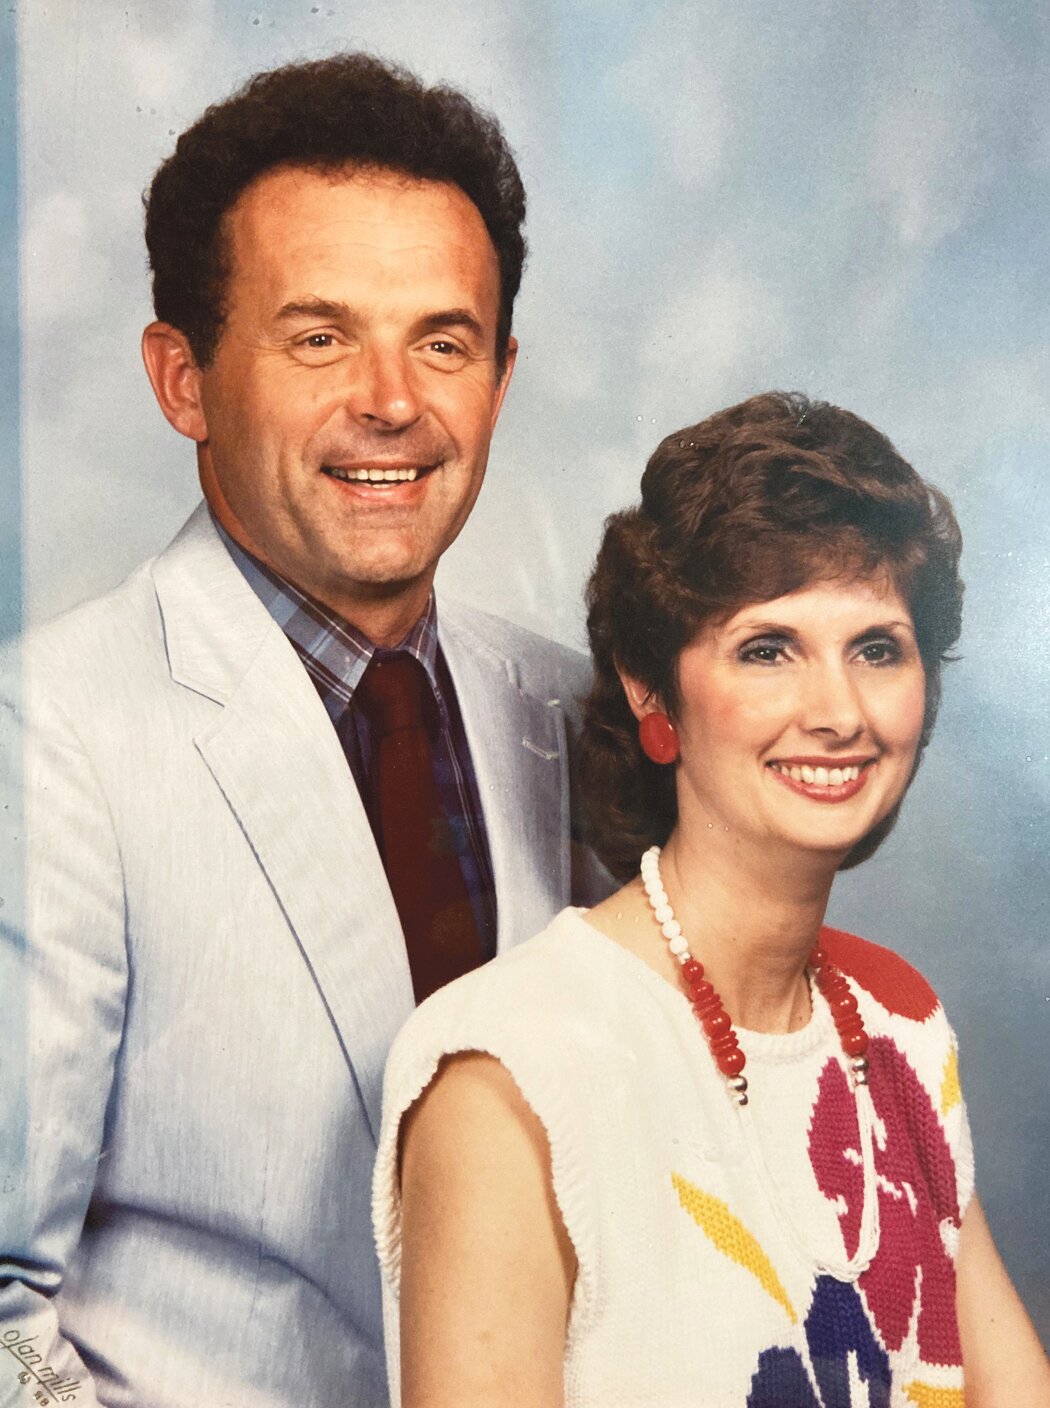 Bob and Cathy Stroup during their busy years as teachers in the Cascade School District.
Submitted Photo